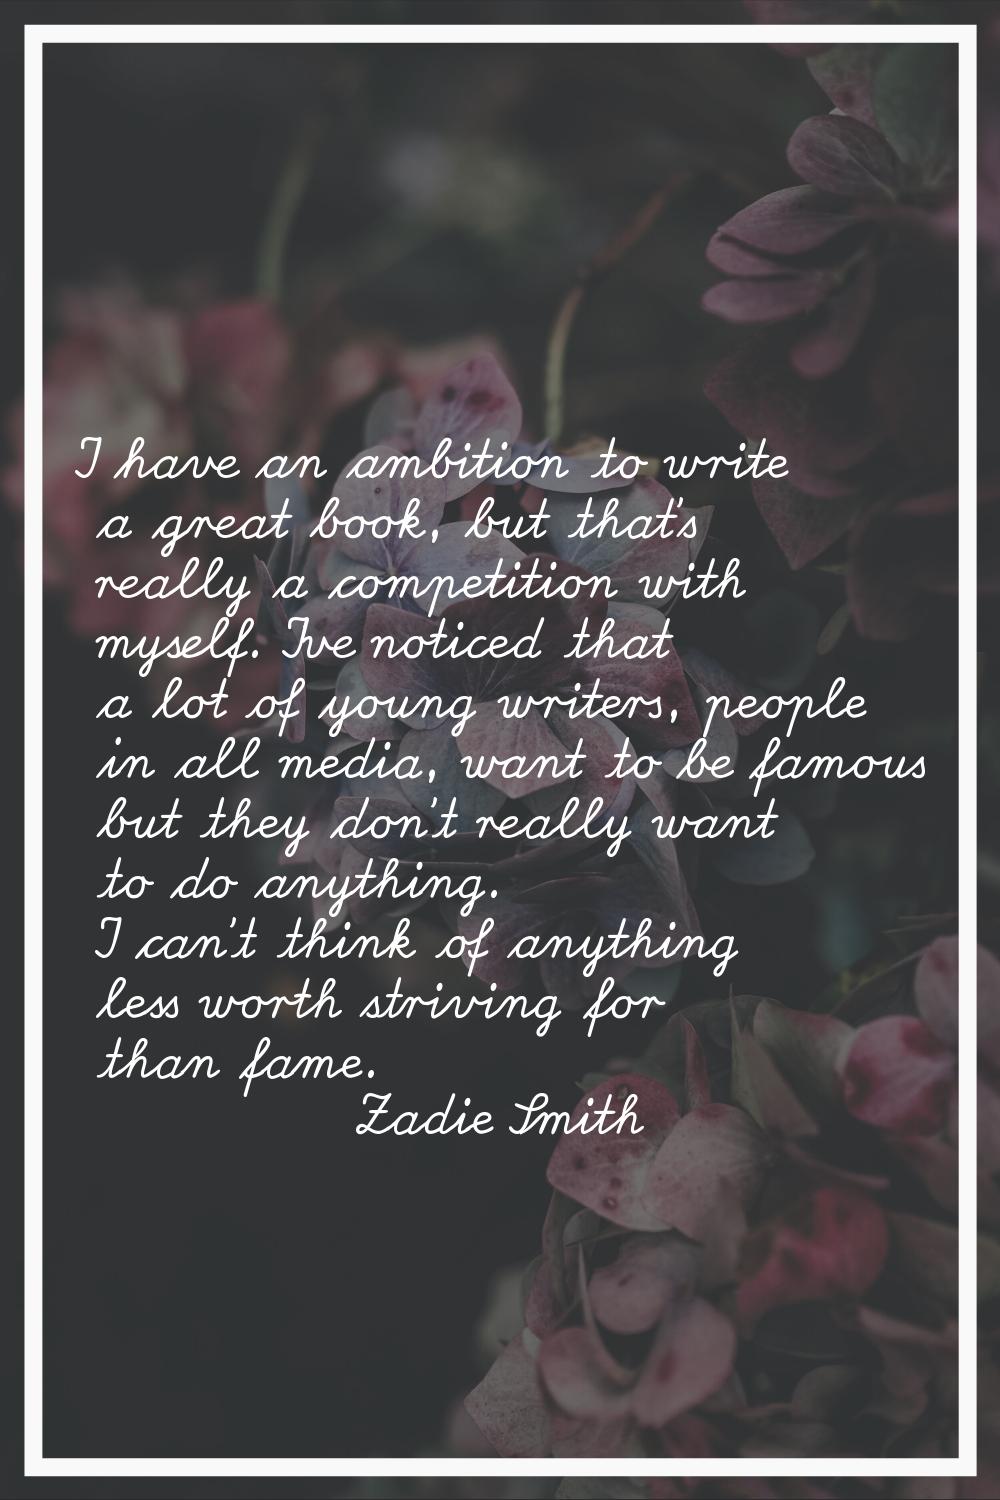 I have an ambition to write a great book, but that's really a competition with myself. I've noticed